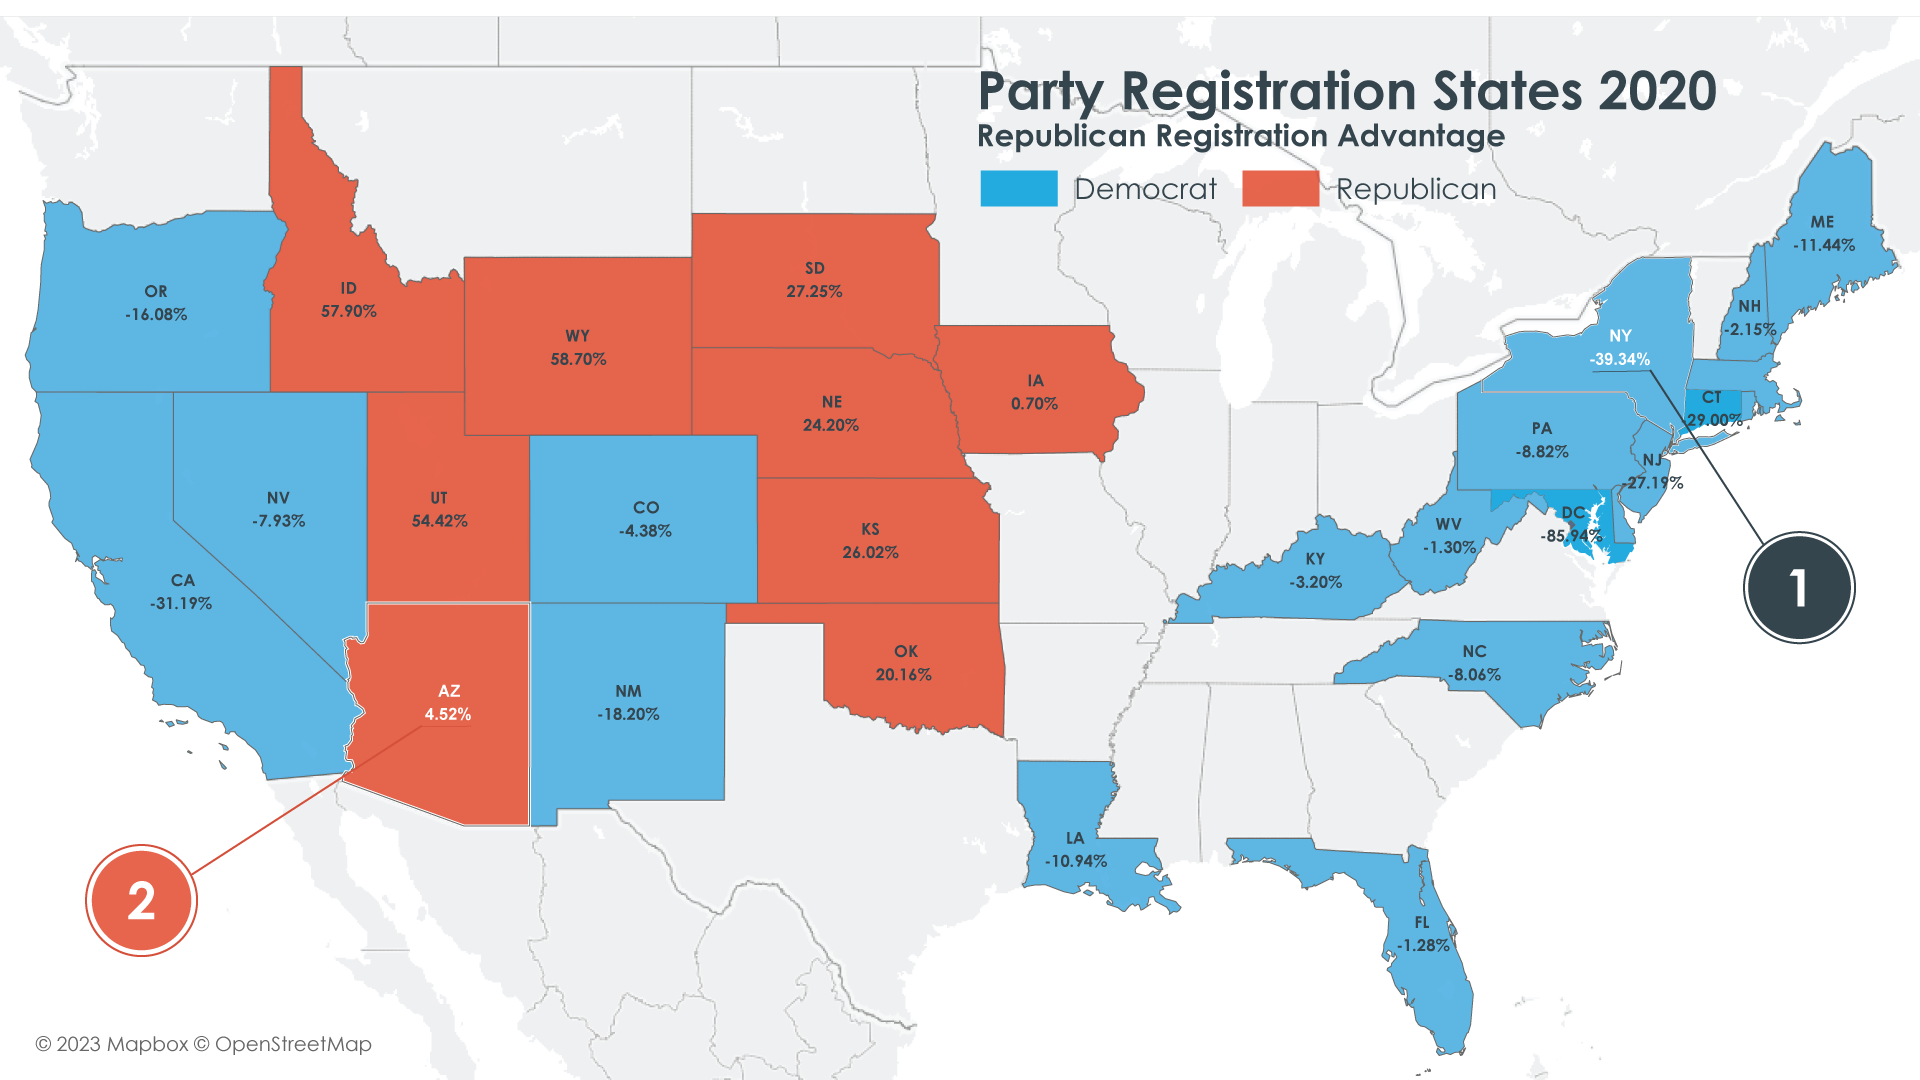 Population Data and Party Registration States in 2020